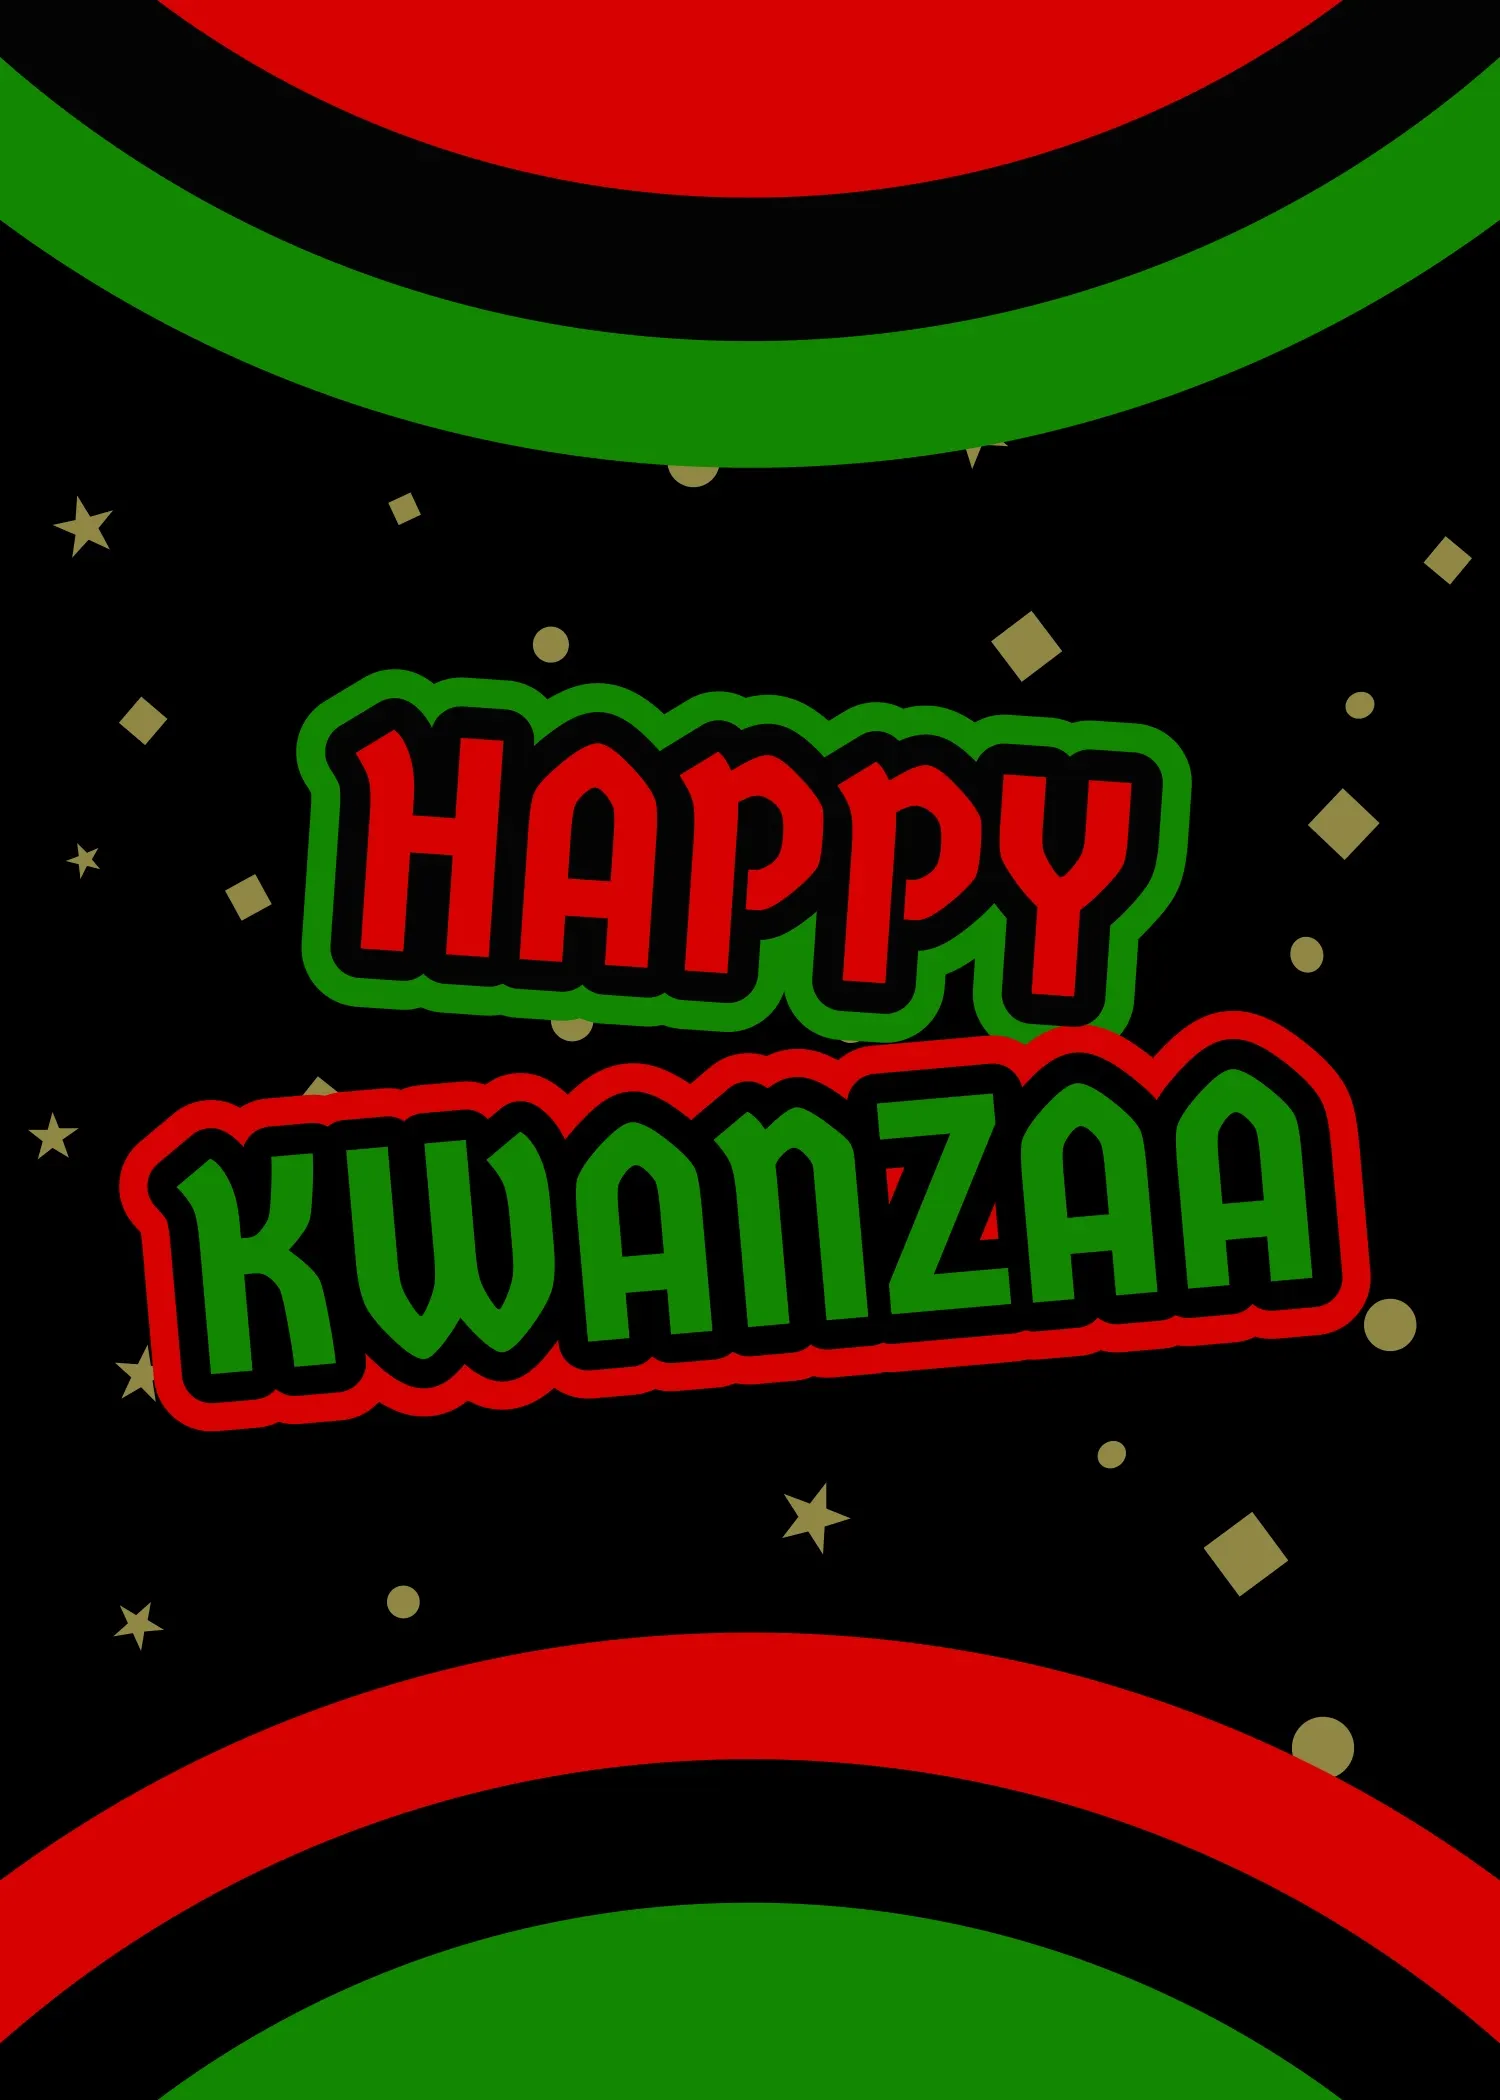 Red And Green Happy Kwanzaa Card Portrait